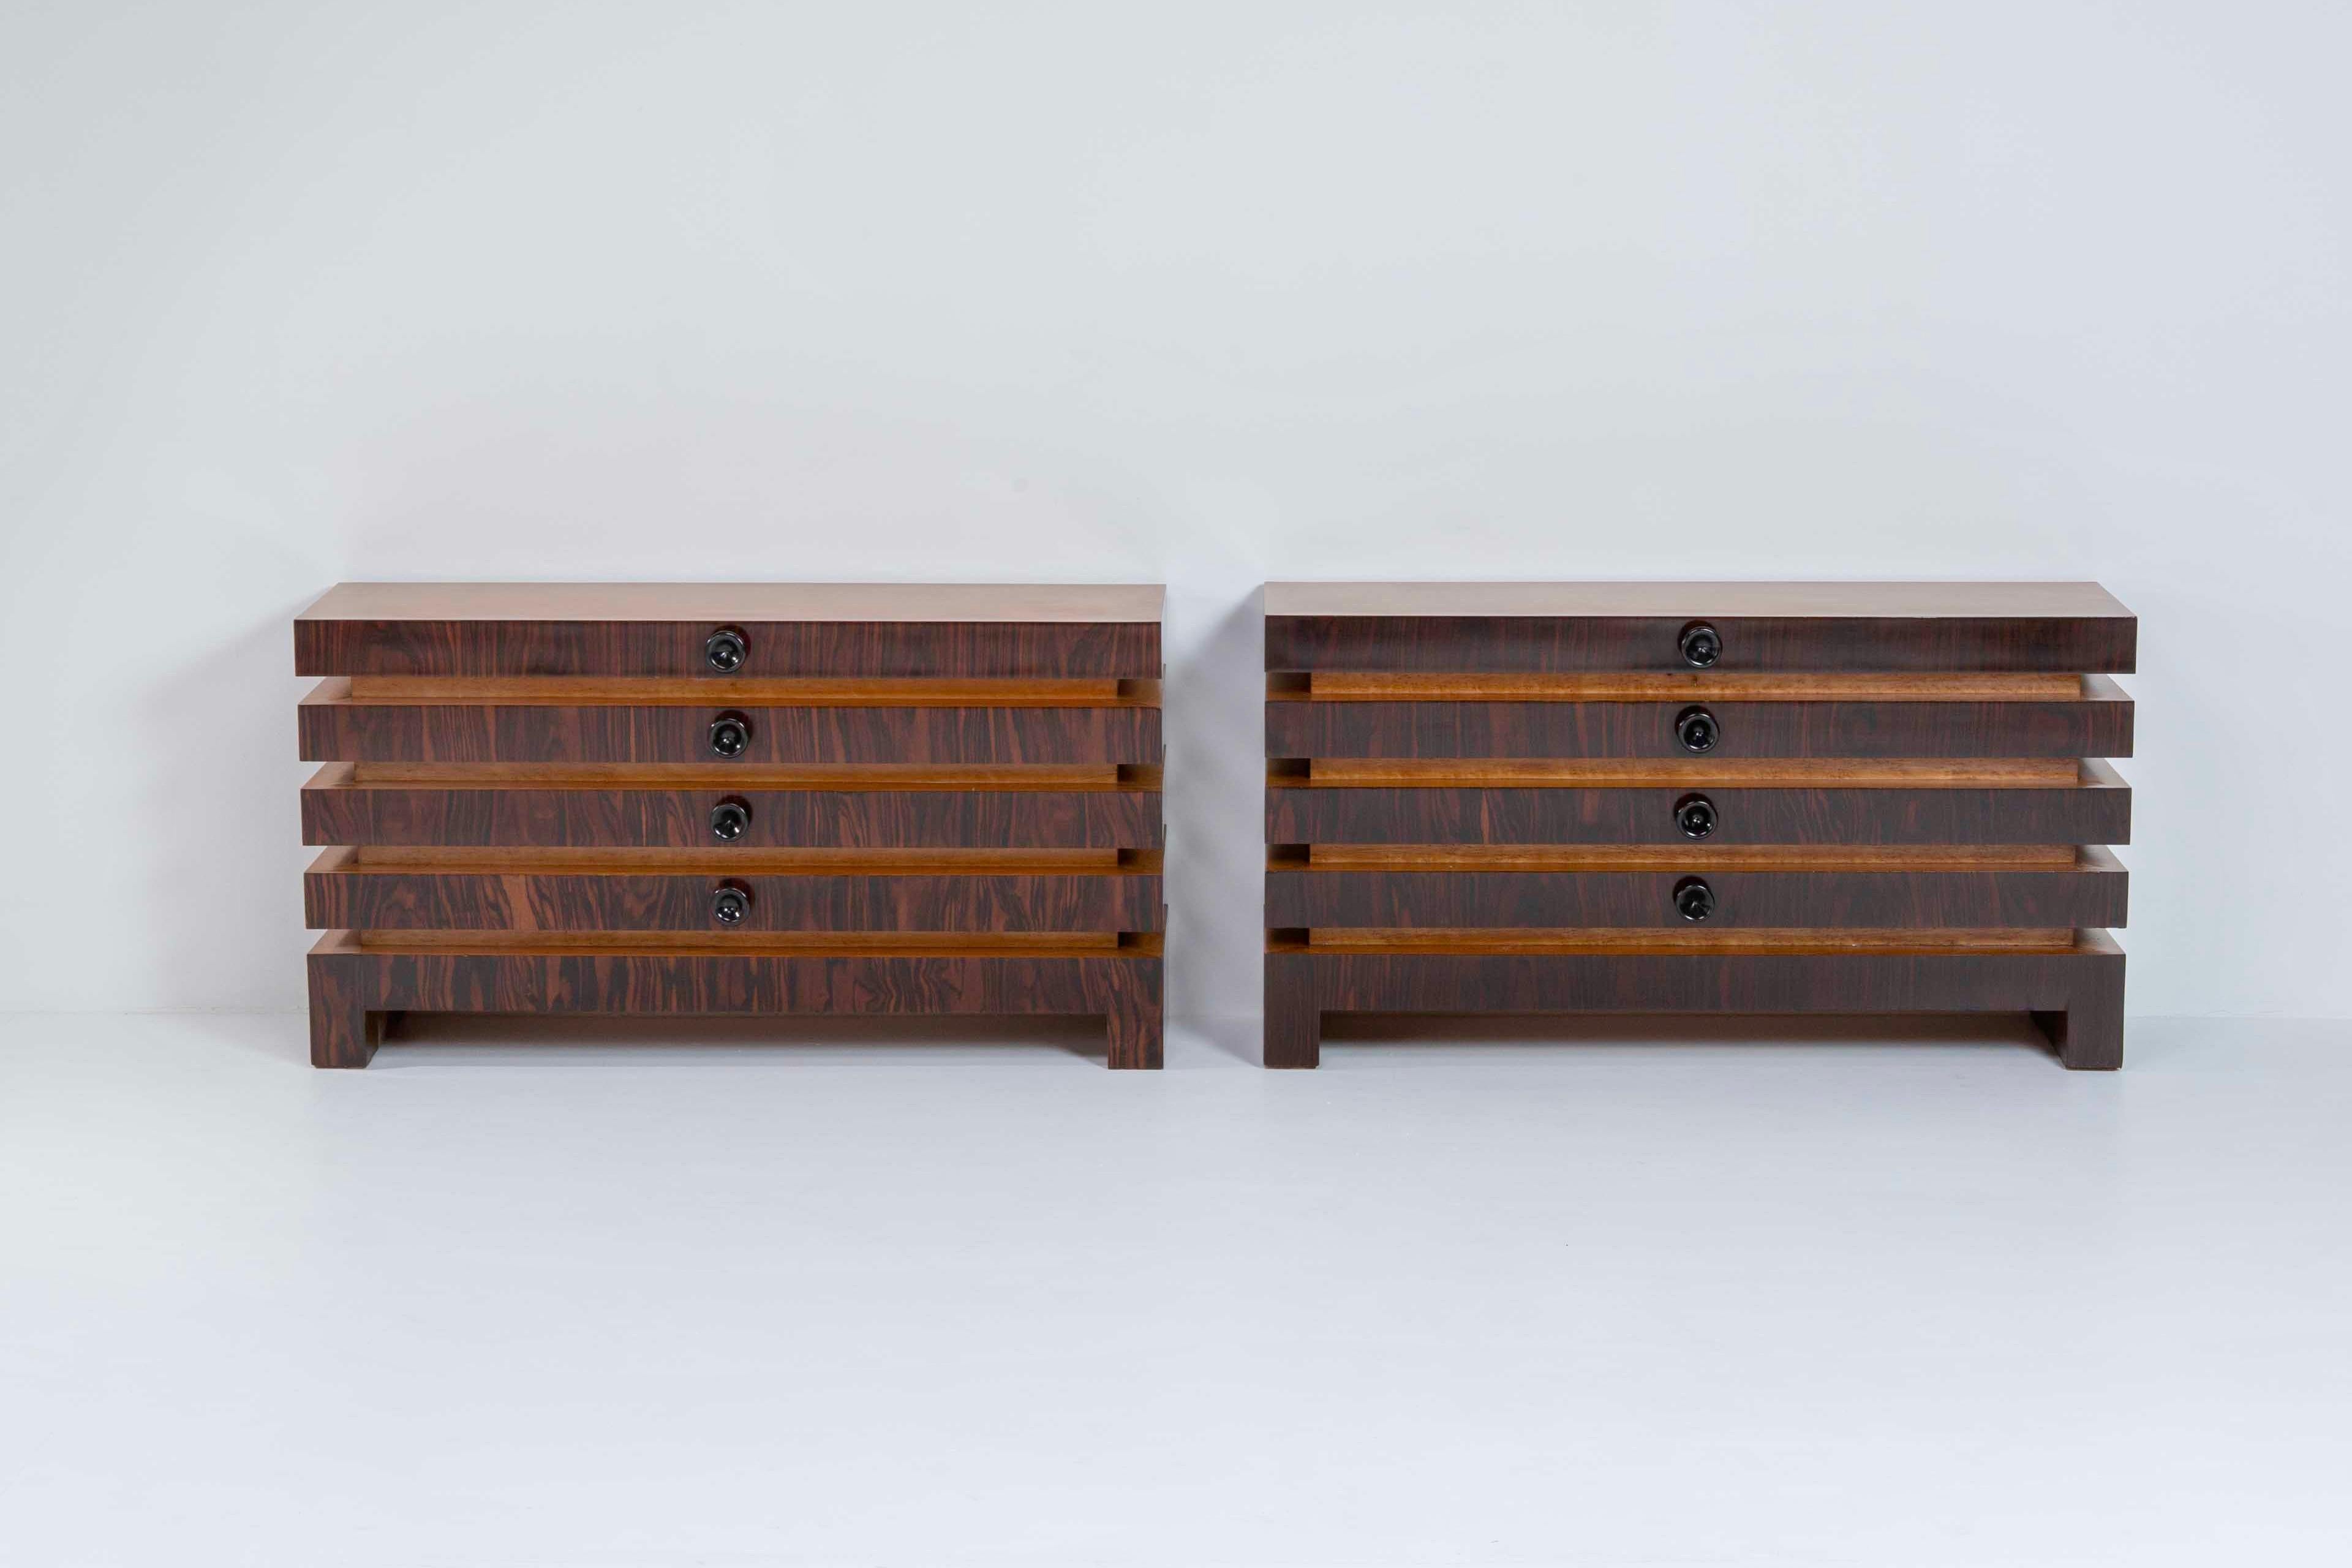 Two Magnificent Wood Consolle Mid-Century Italian Design For Sale 2